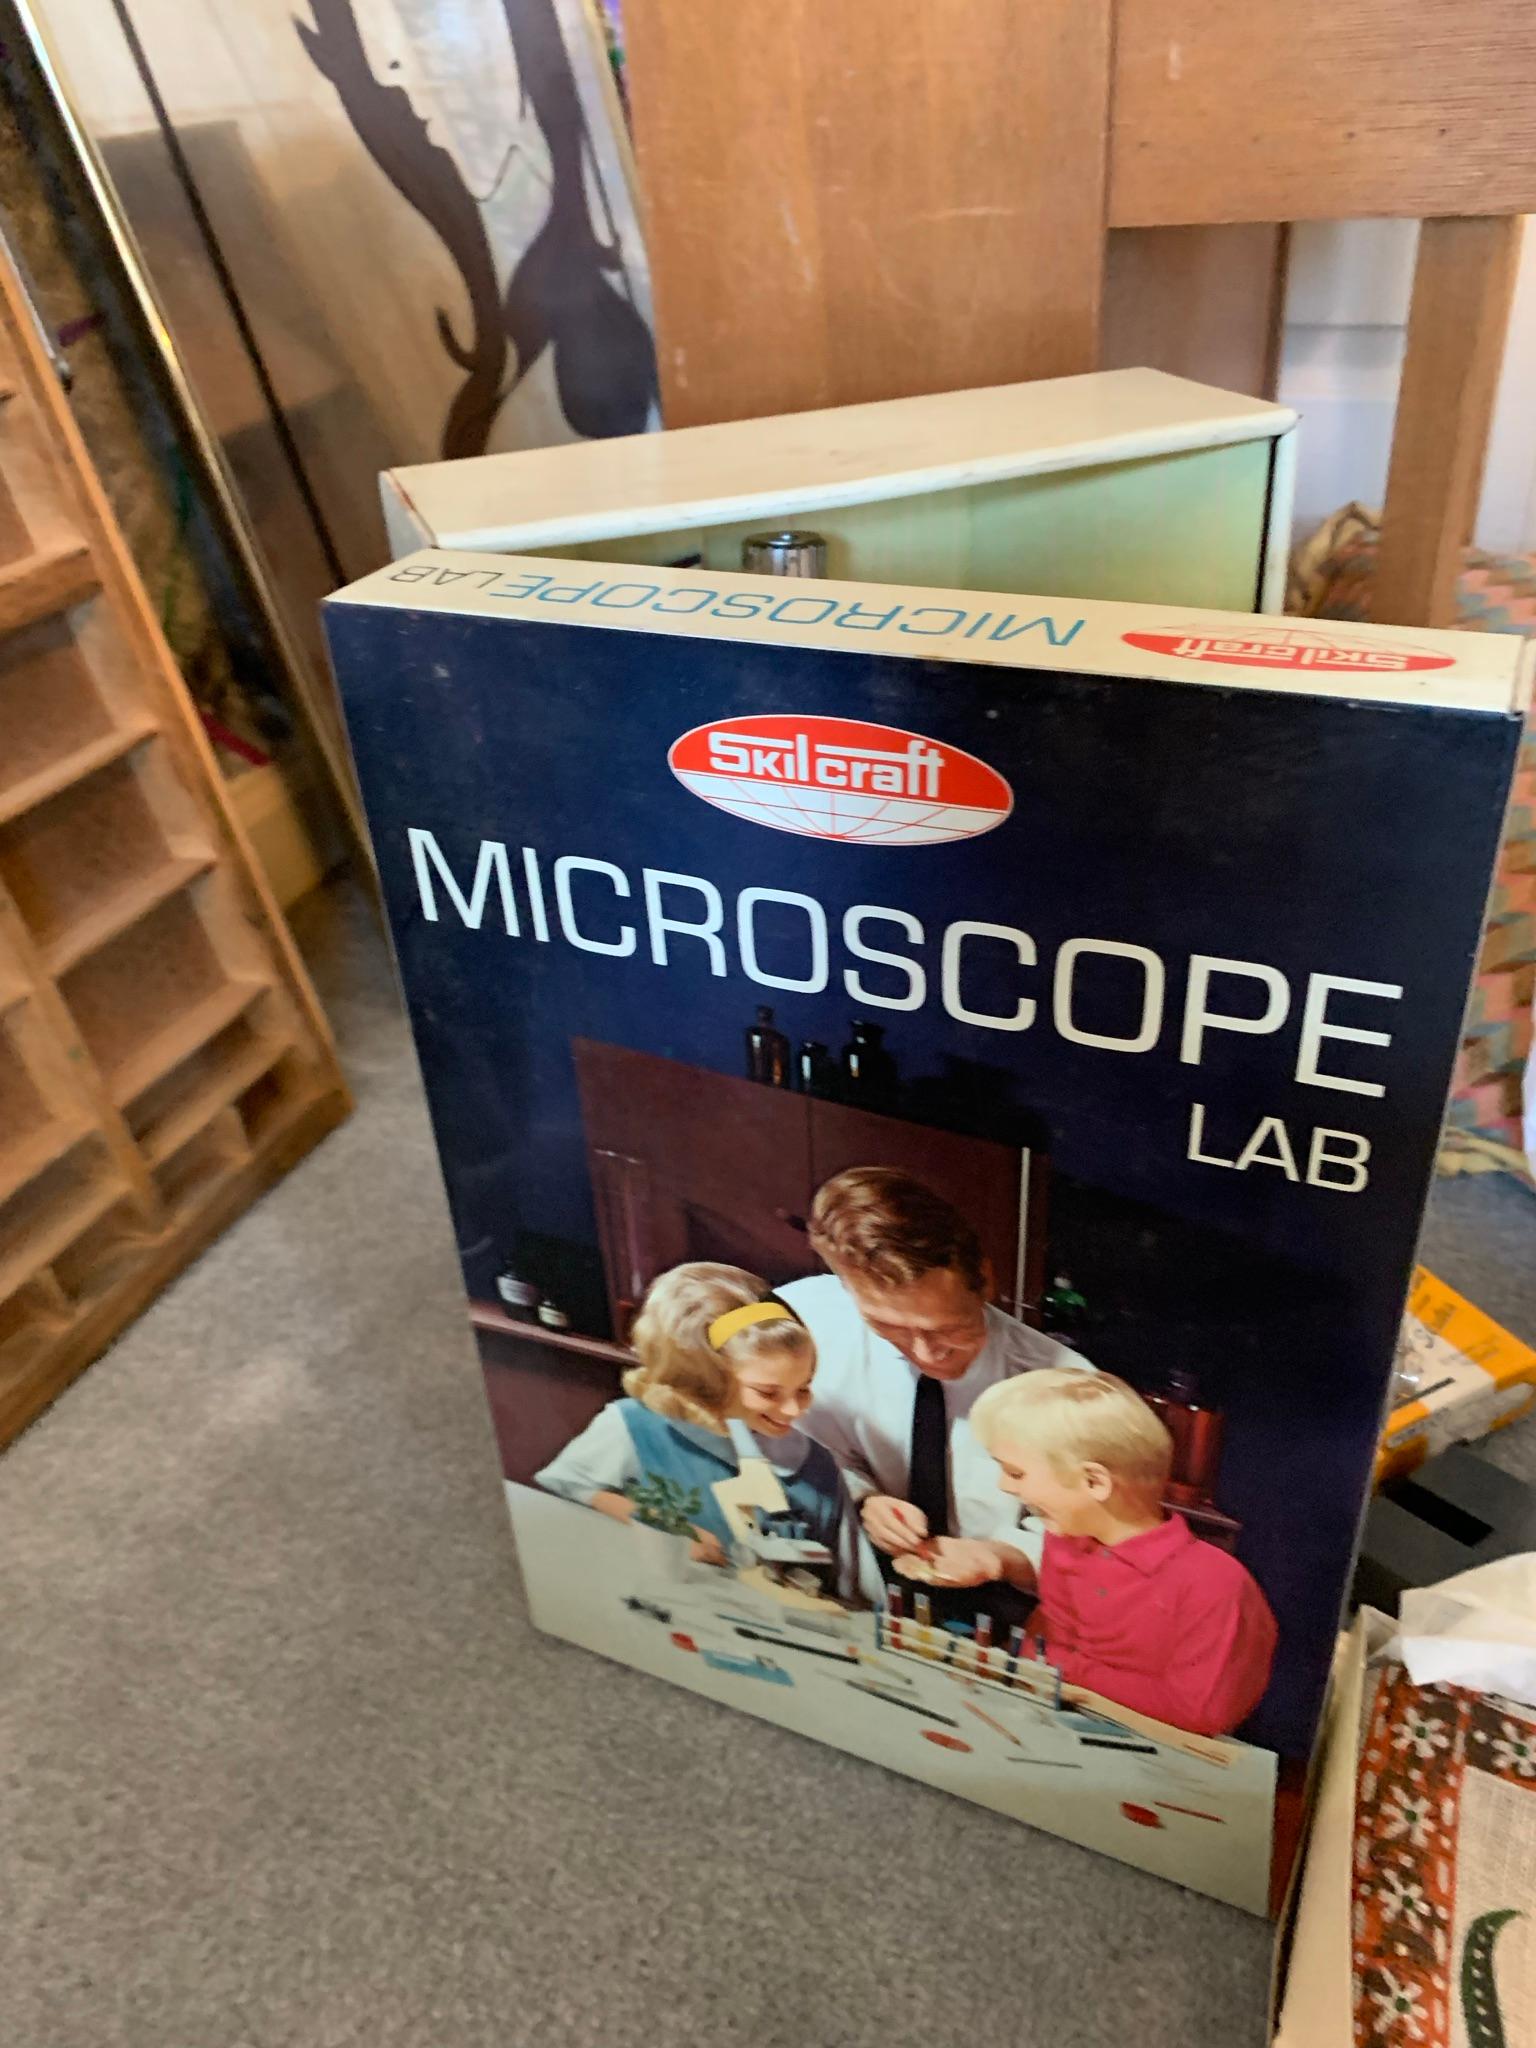 Microscope, Crafting Items, Electronics, Printer Drawer, Child's Piano & More